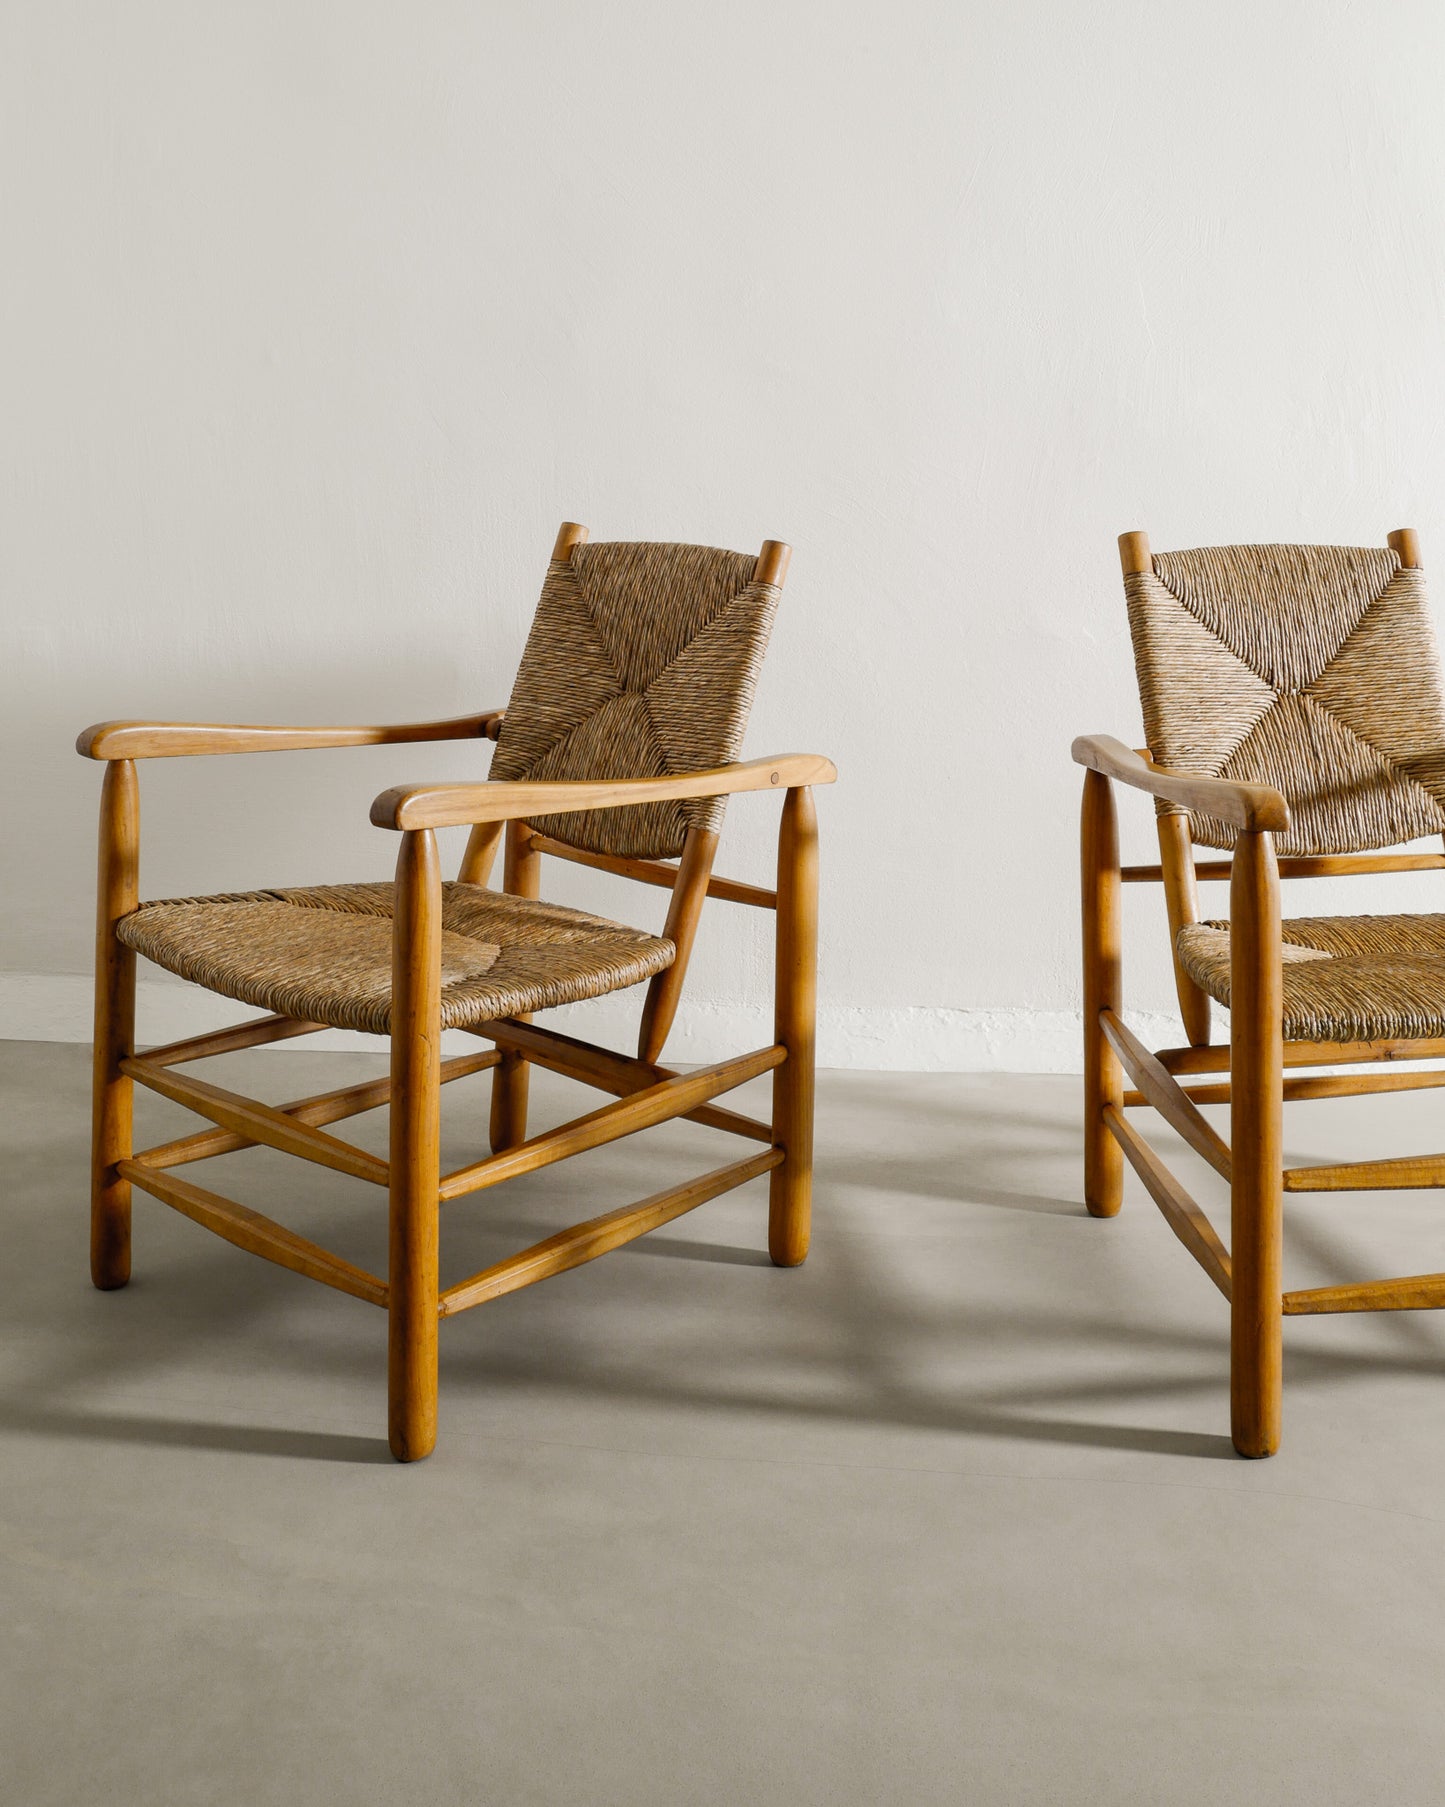 CHARLOTTE PERRIAND "N21" ARMCHAIRS, 1940s